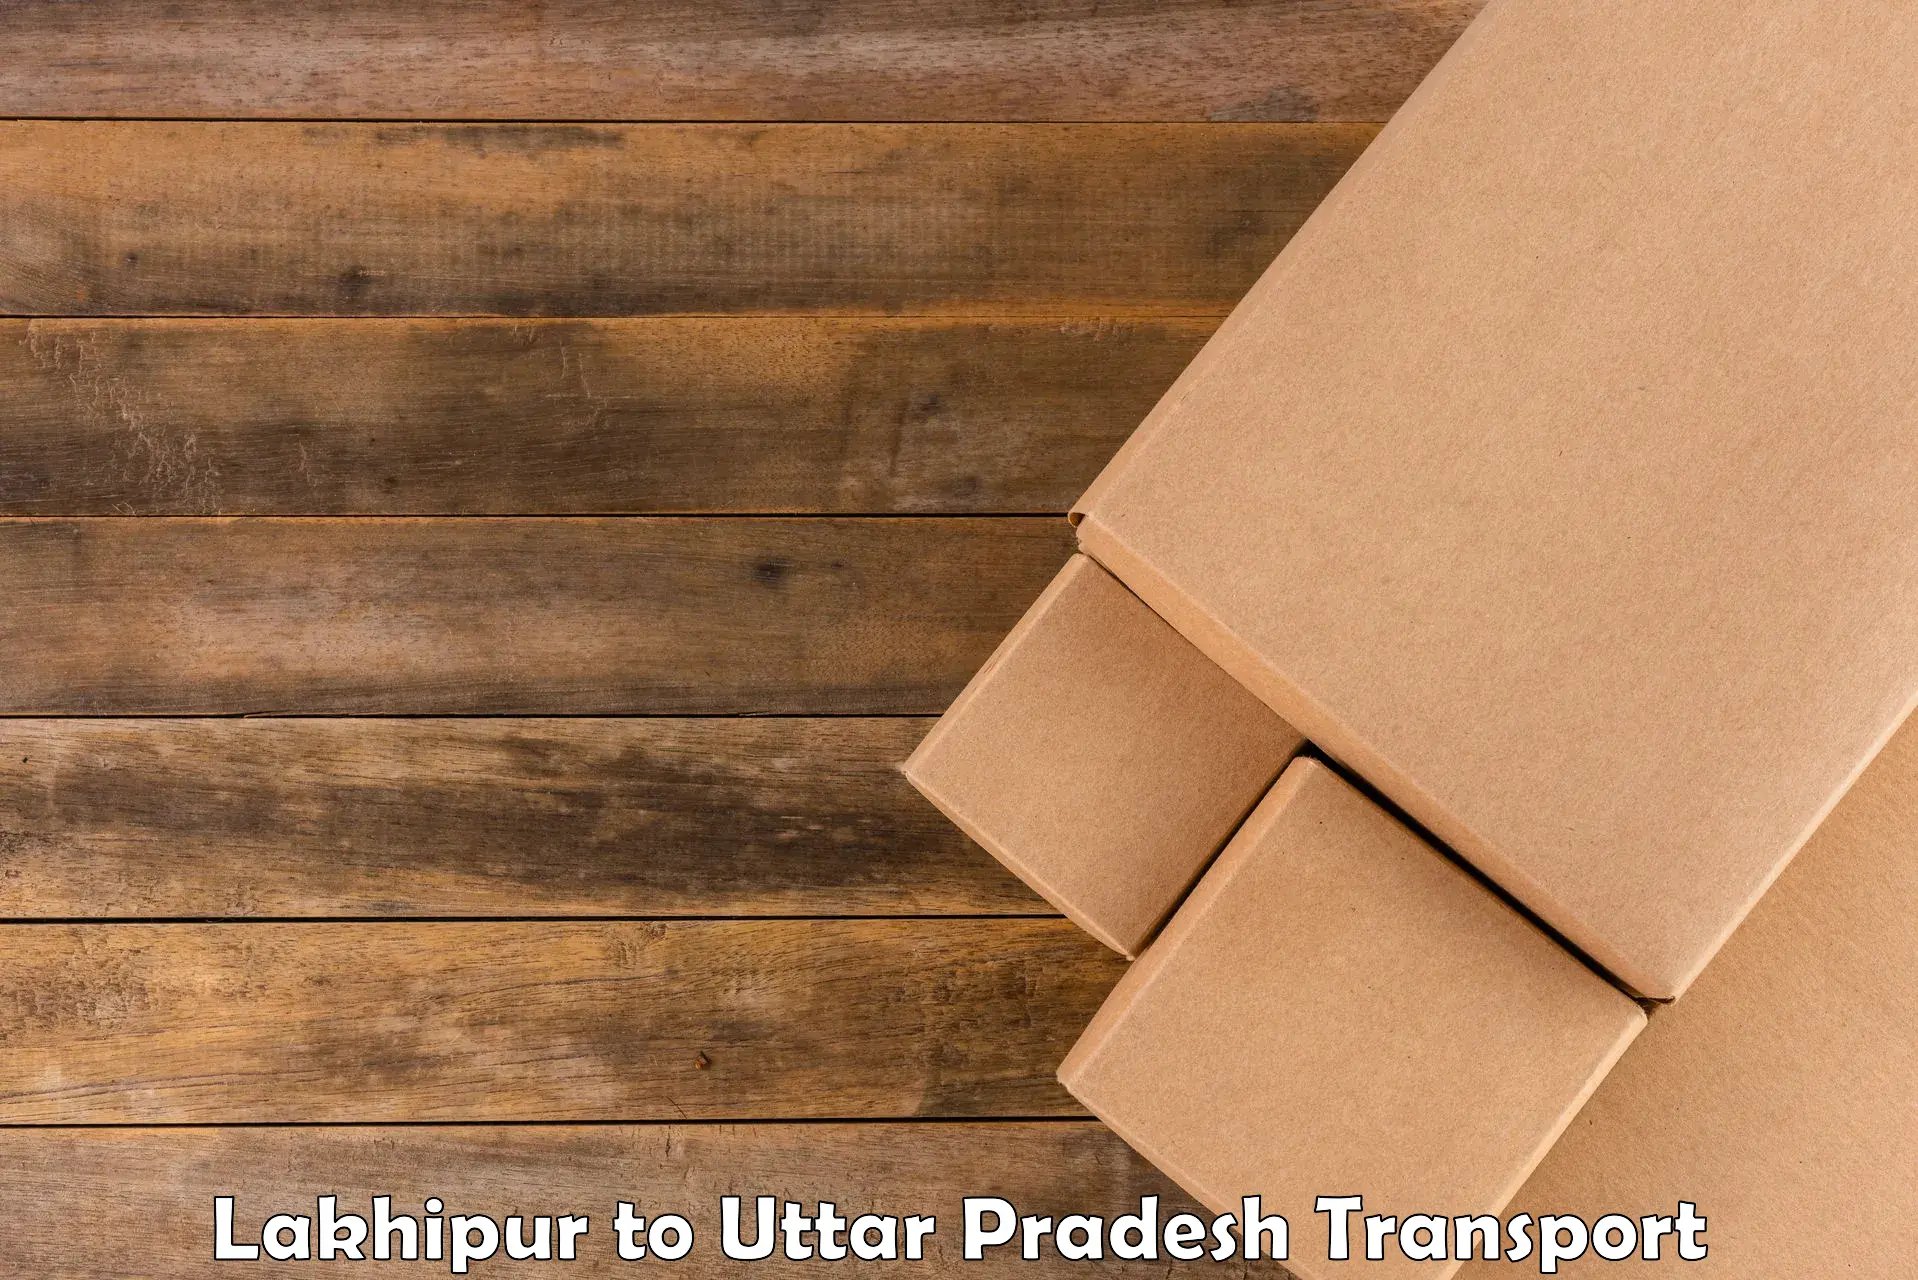 Truck transport companies in India Lakhipur to Gauri Bazar